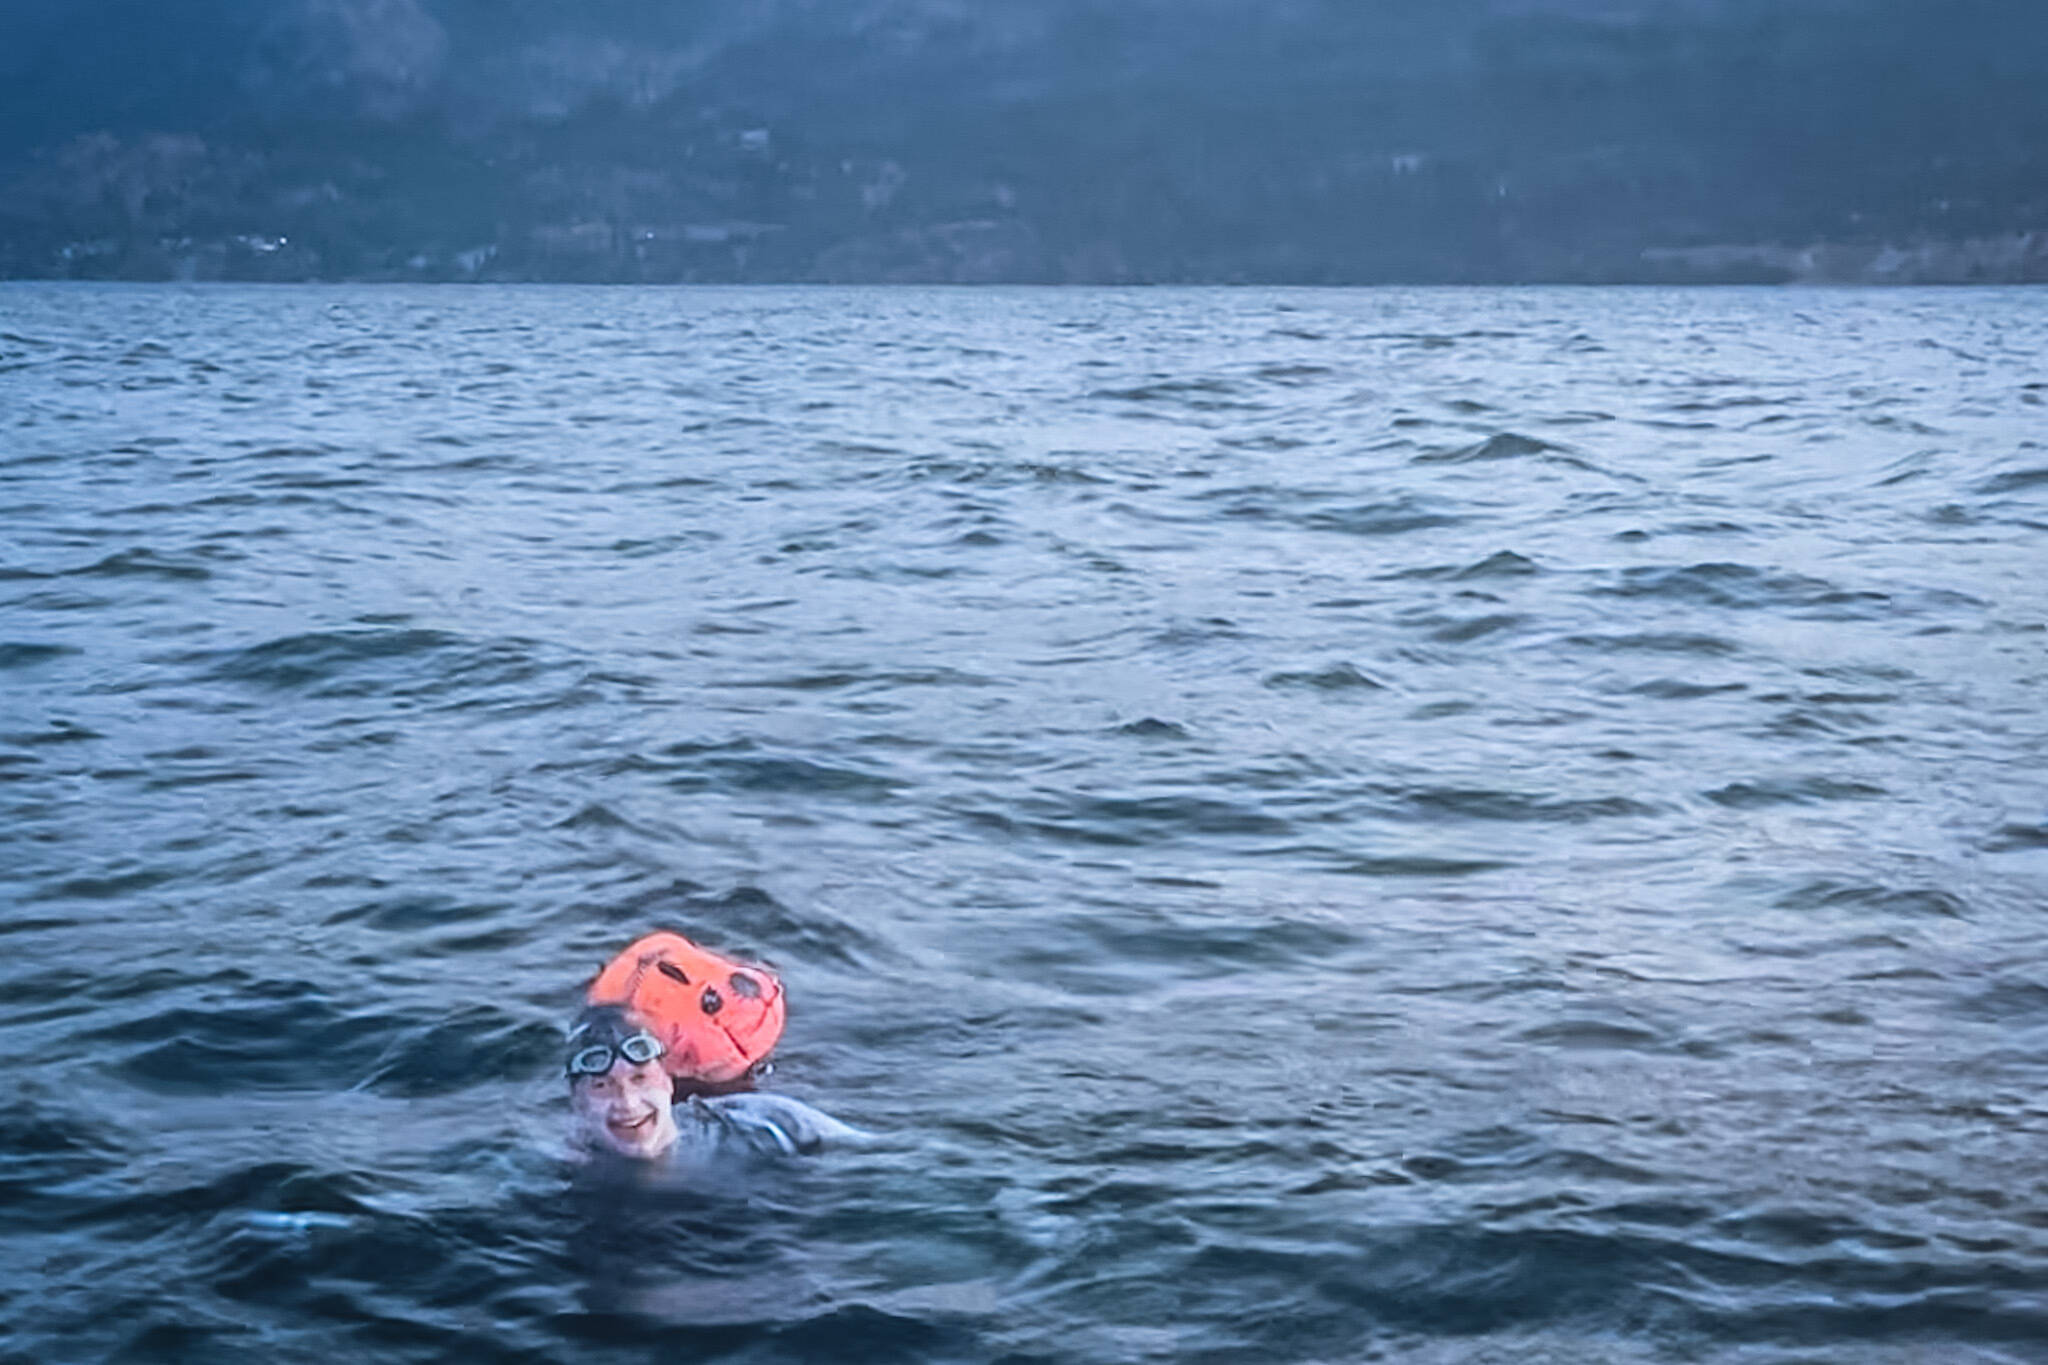 Nick Pelletier, an endurance athlete based in Kelowna, is vying to beat a world record by swimming the length of Okanagan Lake from Vernon to Penticton. (Jacqueline Gelineau/Capital News)